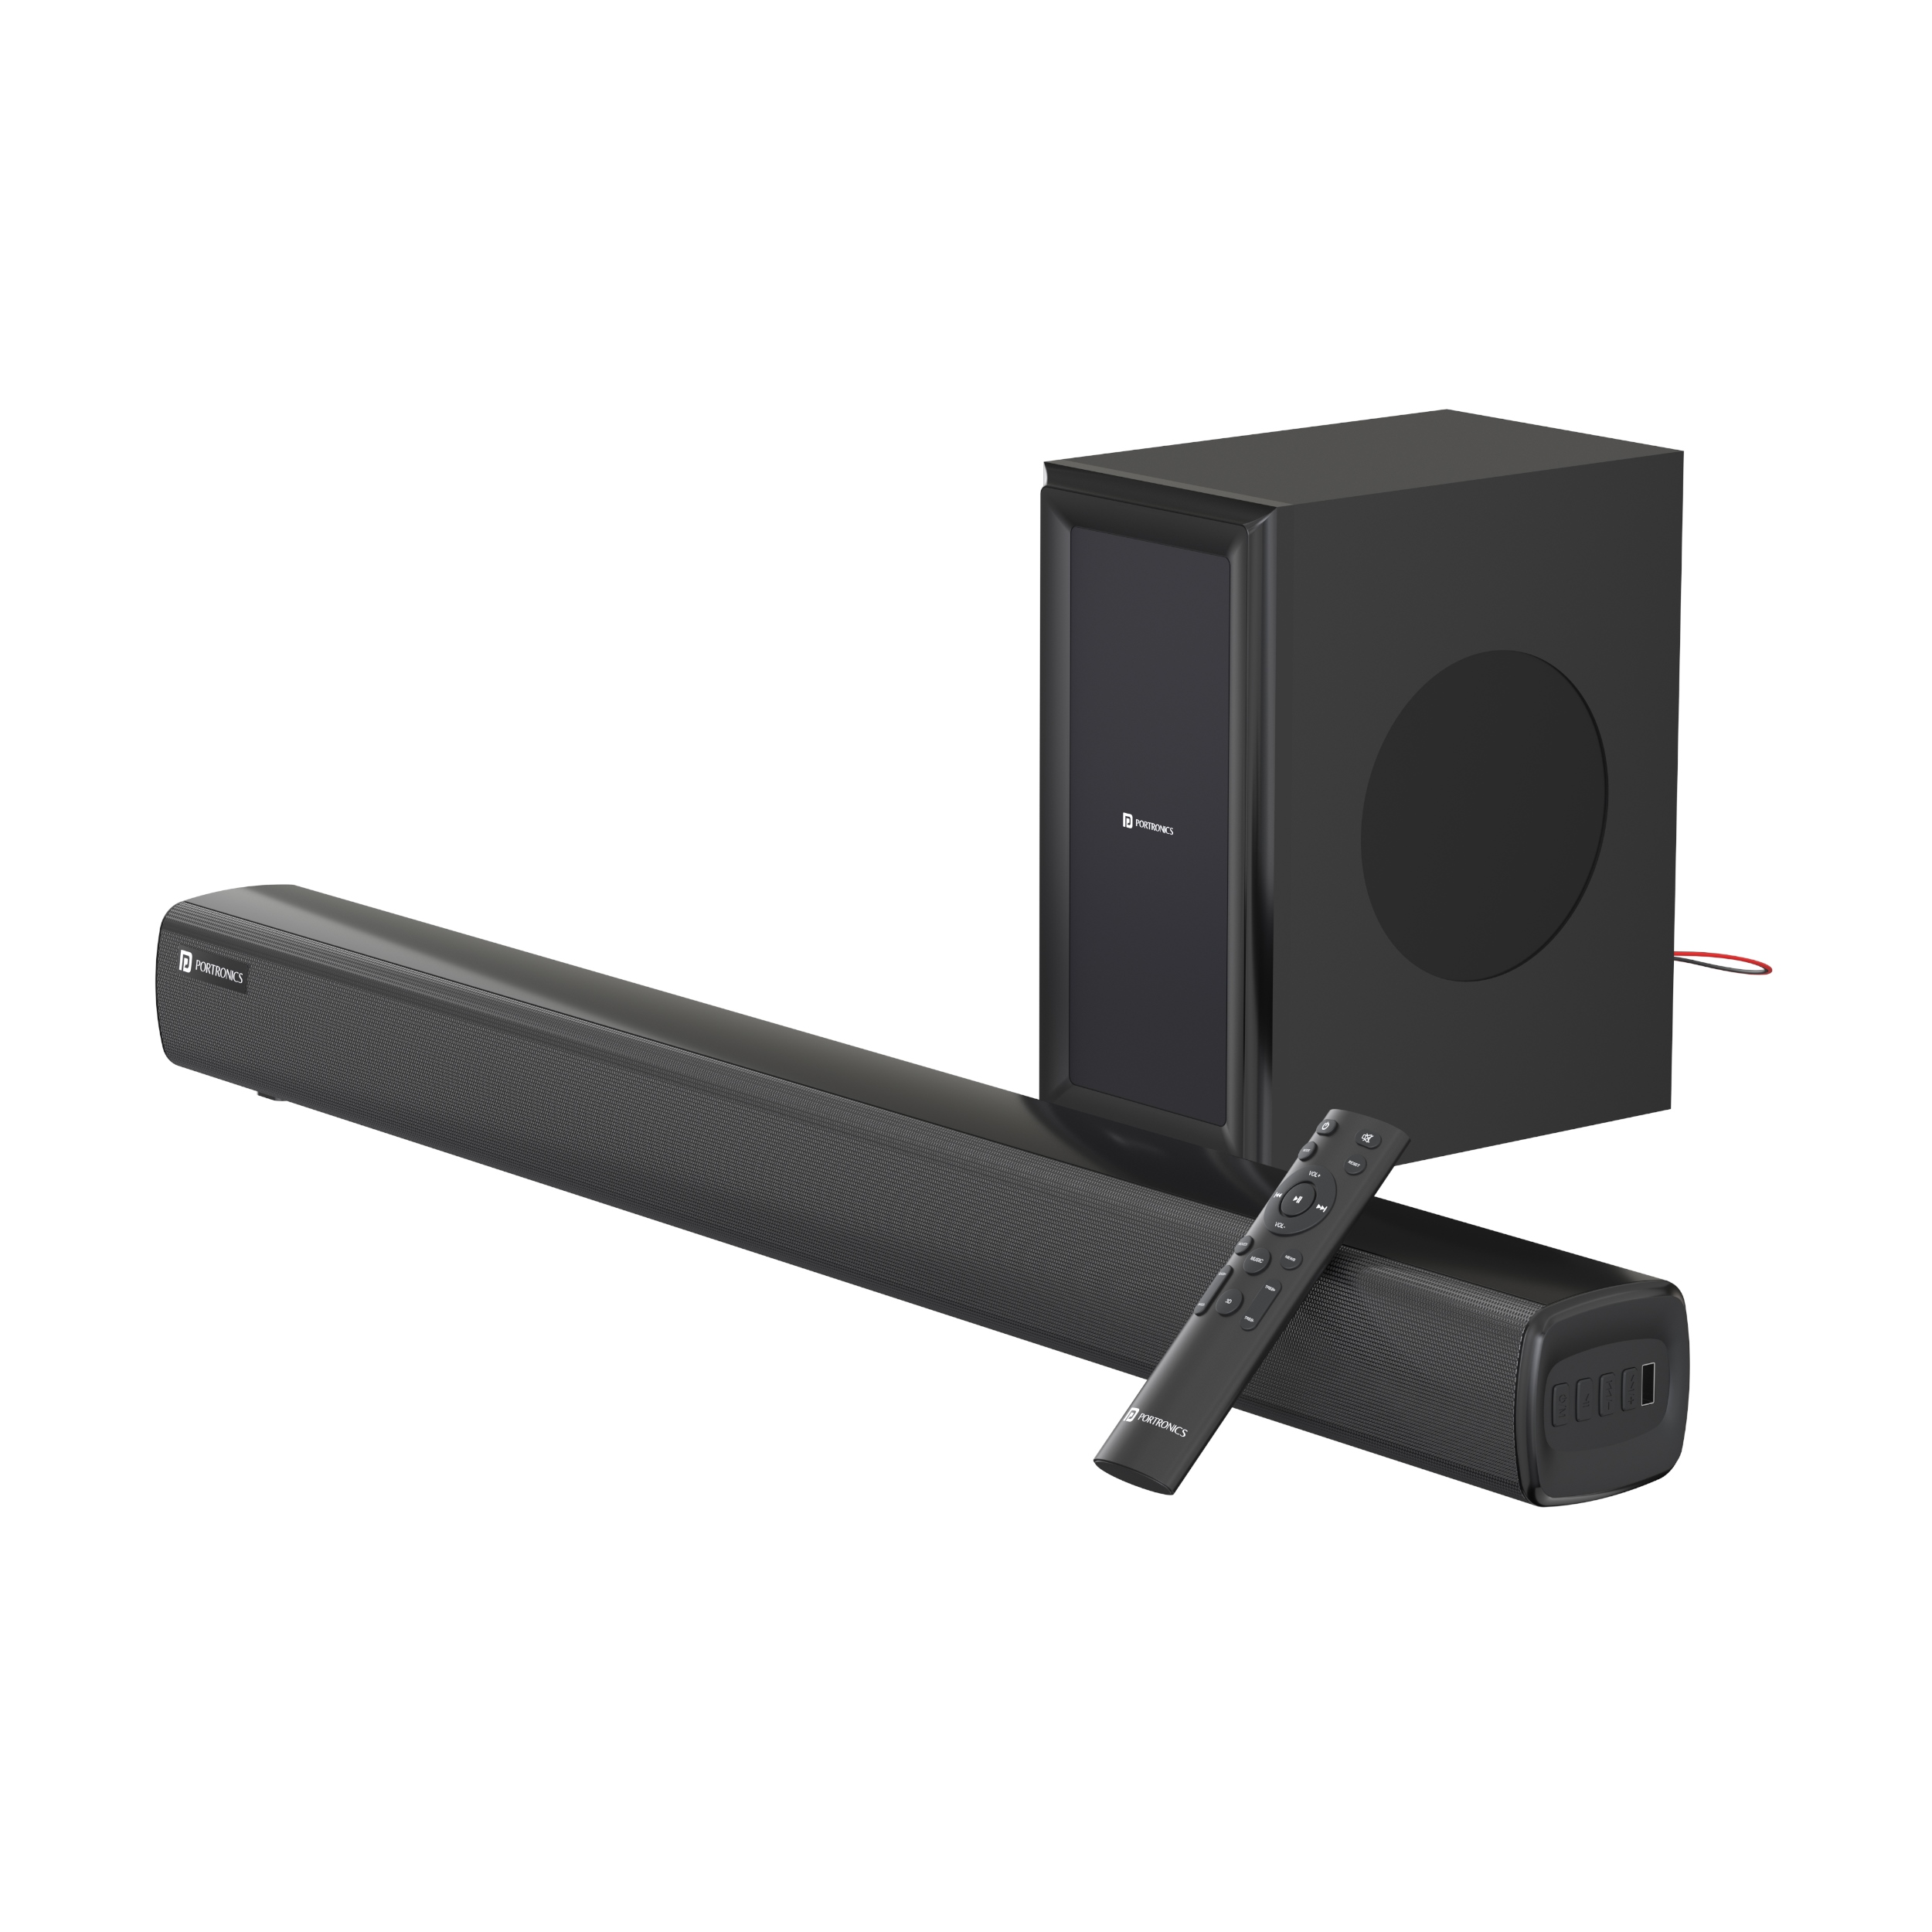 Portronics Introduces ‘Pure Sound 101’- a Sound Bar with Wired Subwoofer